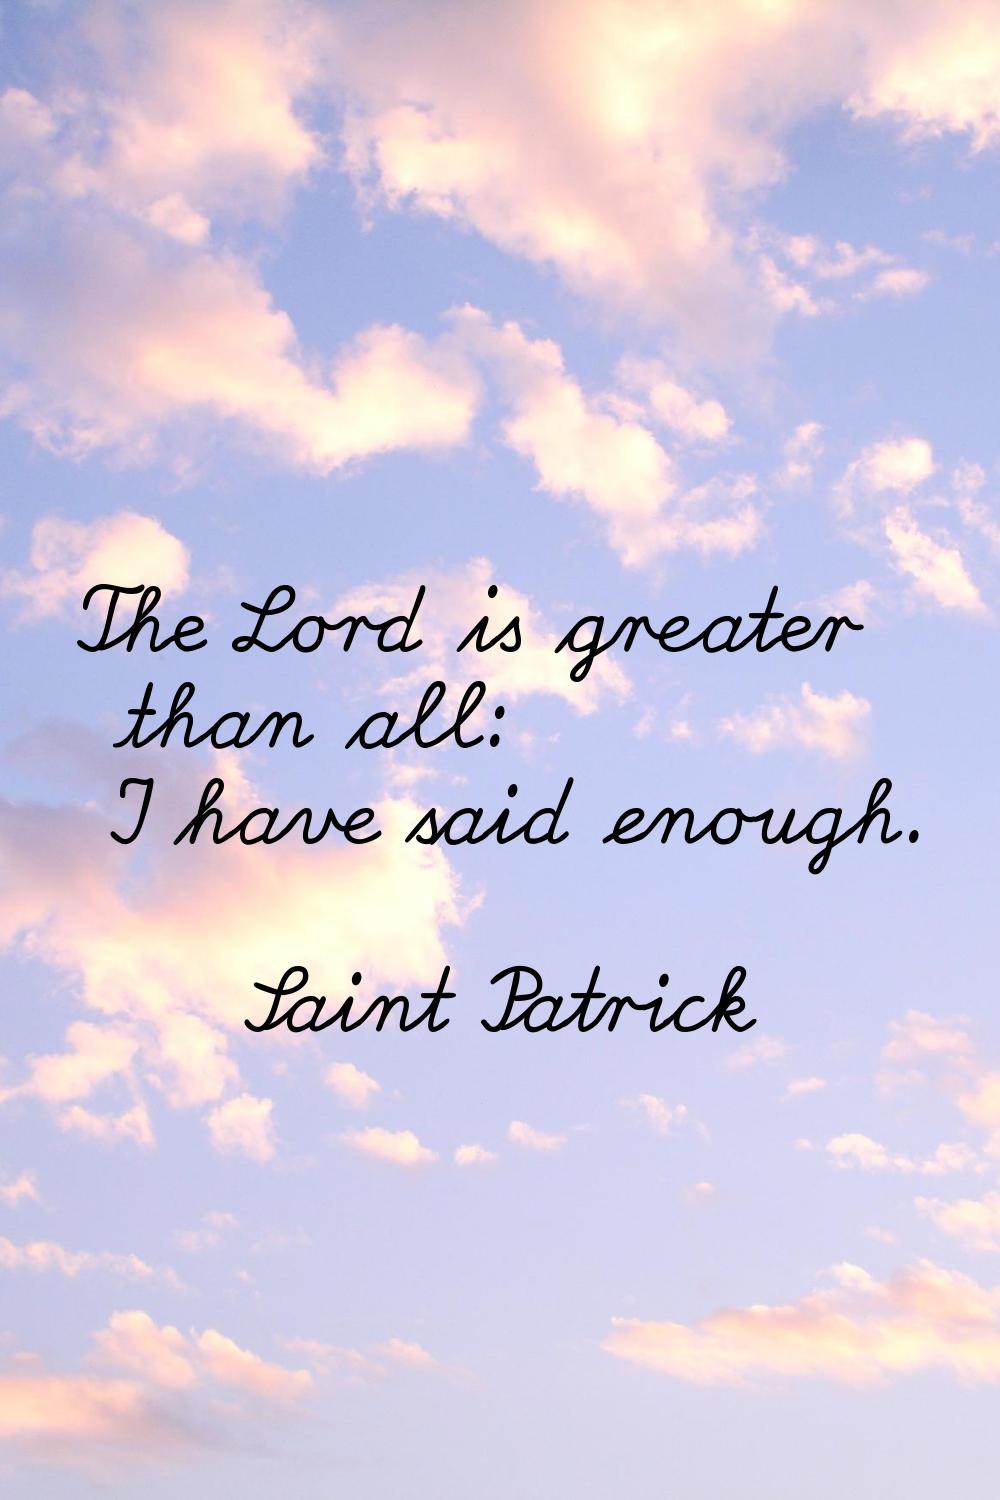 The Lord is greater than all: I have said enough.